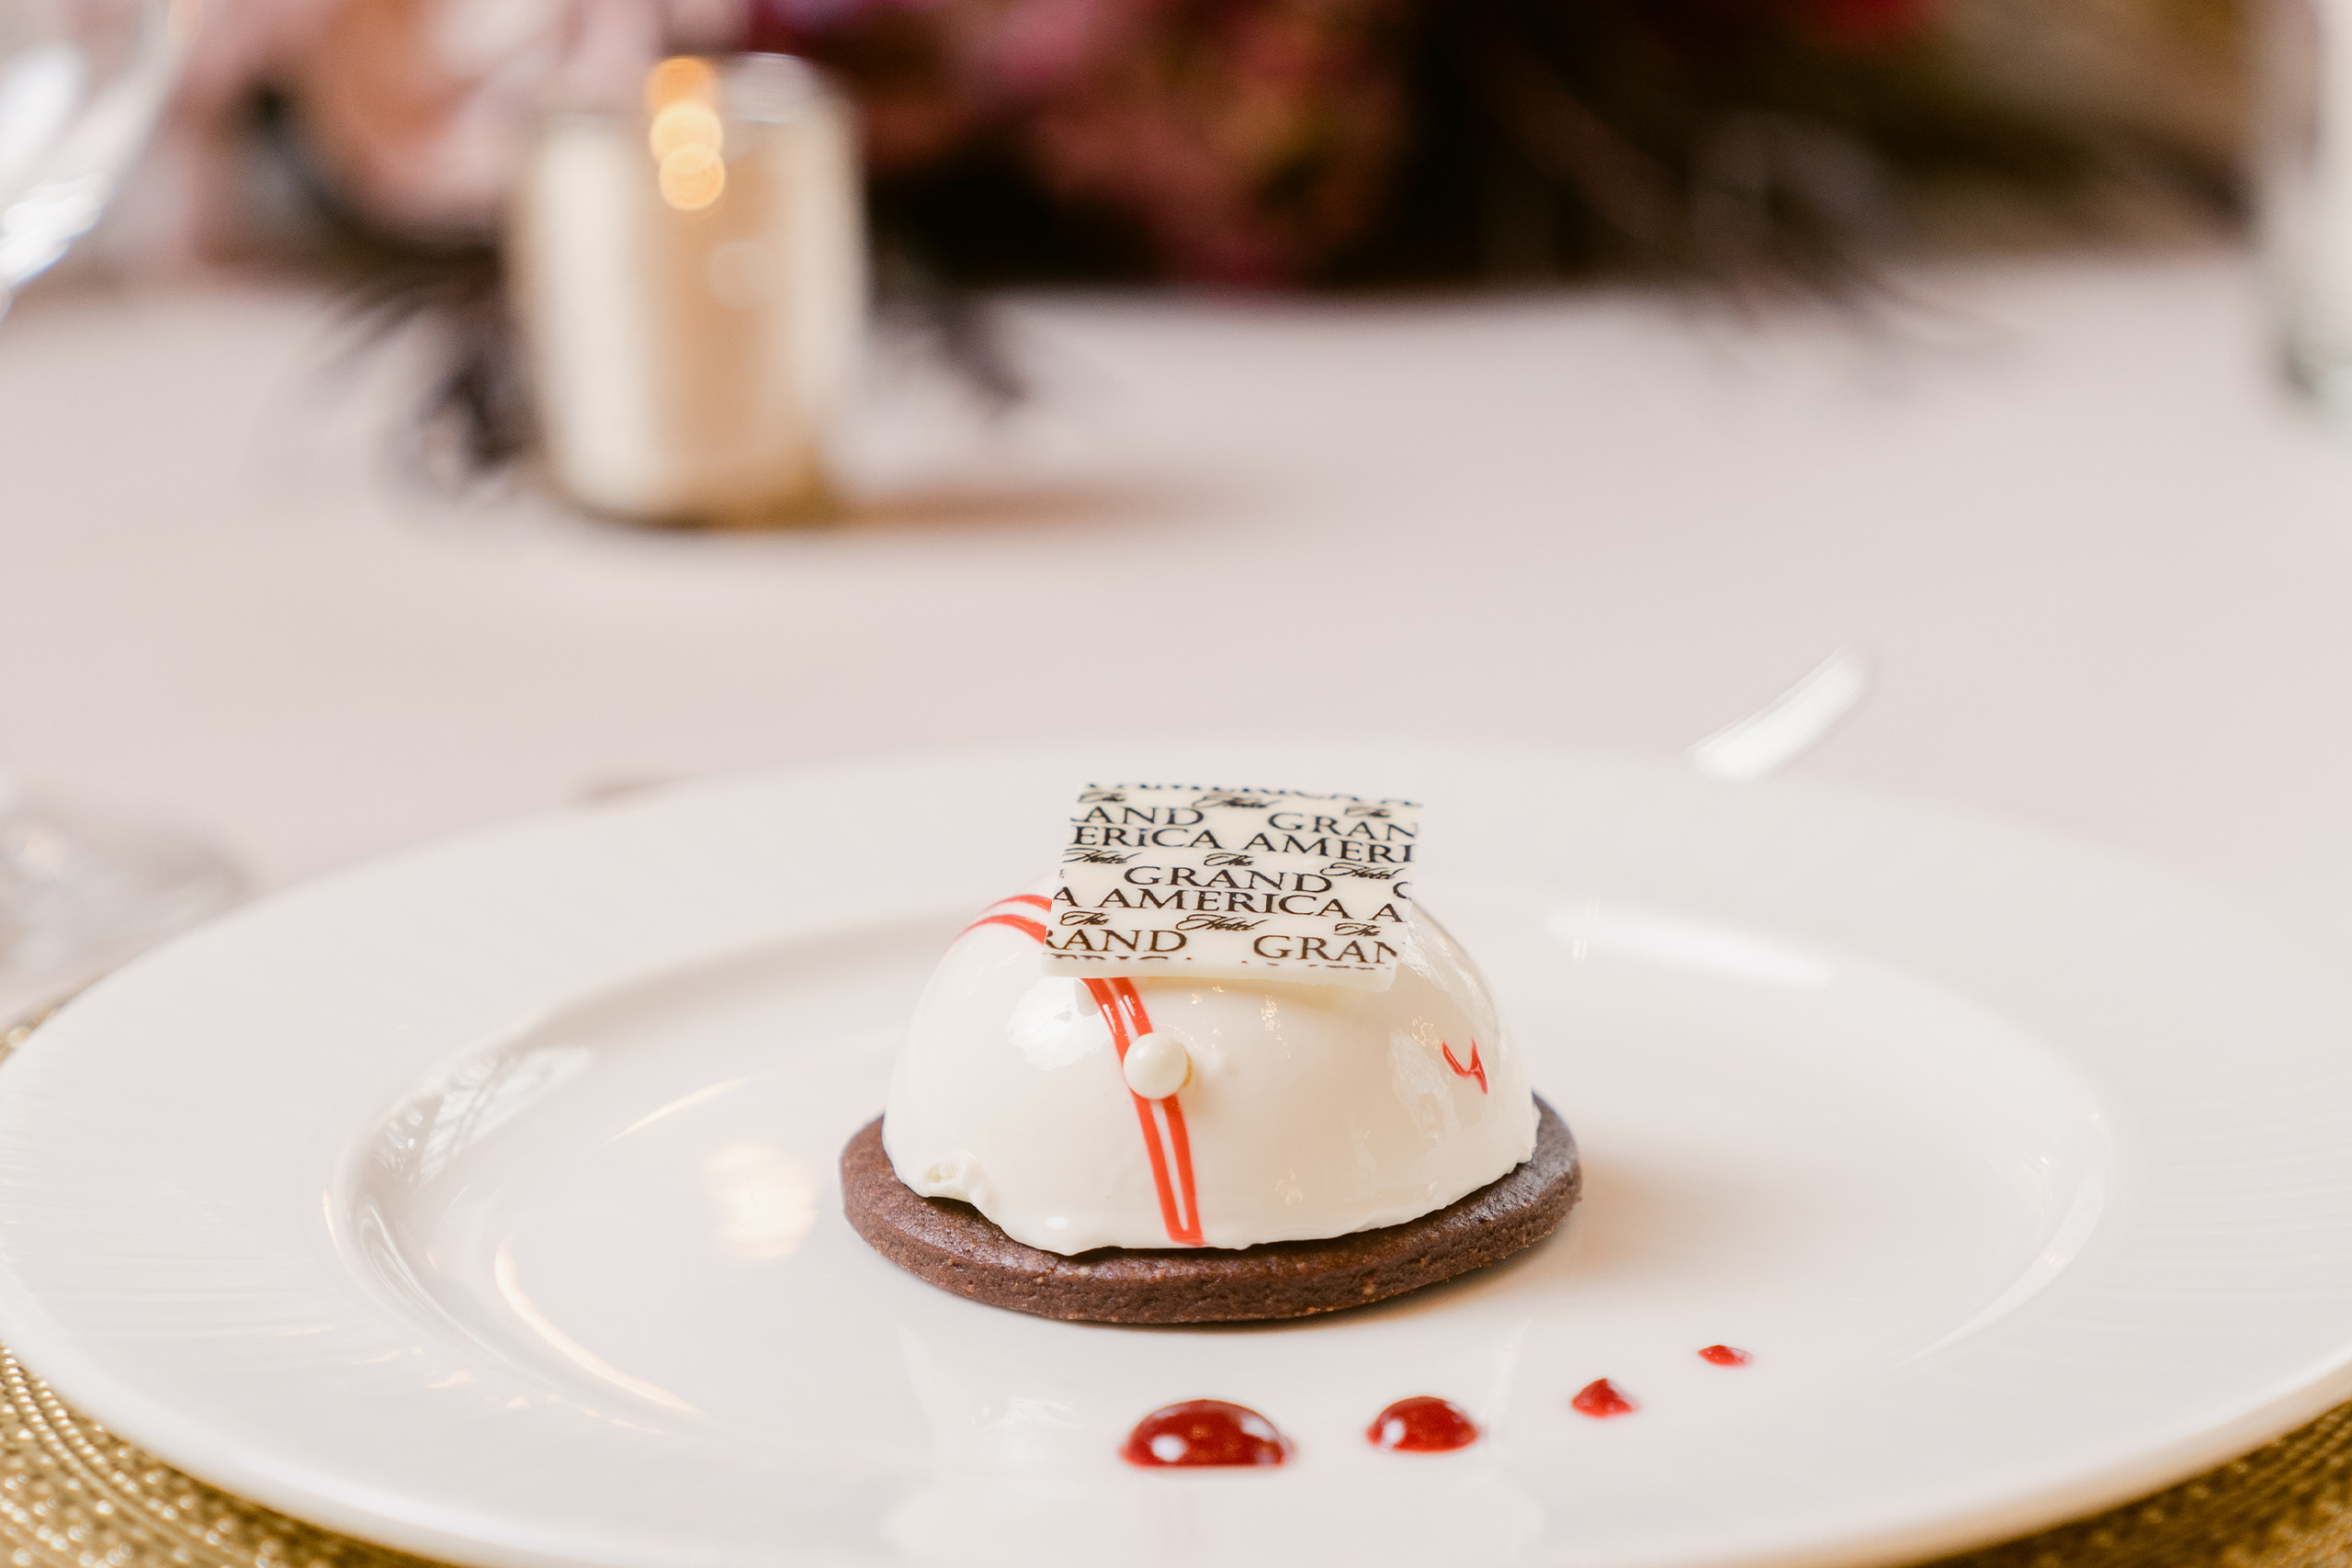 A vanilla and chocolate dessert for a wedding at The Grand America Hotel.